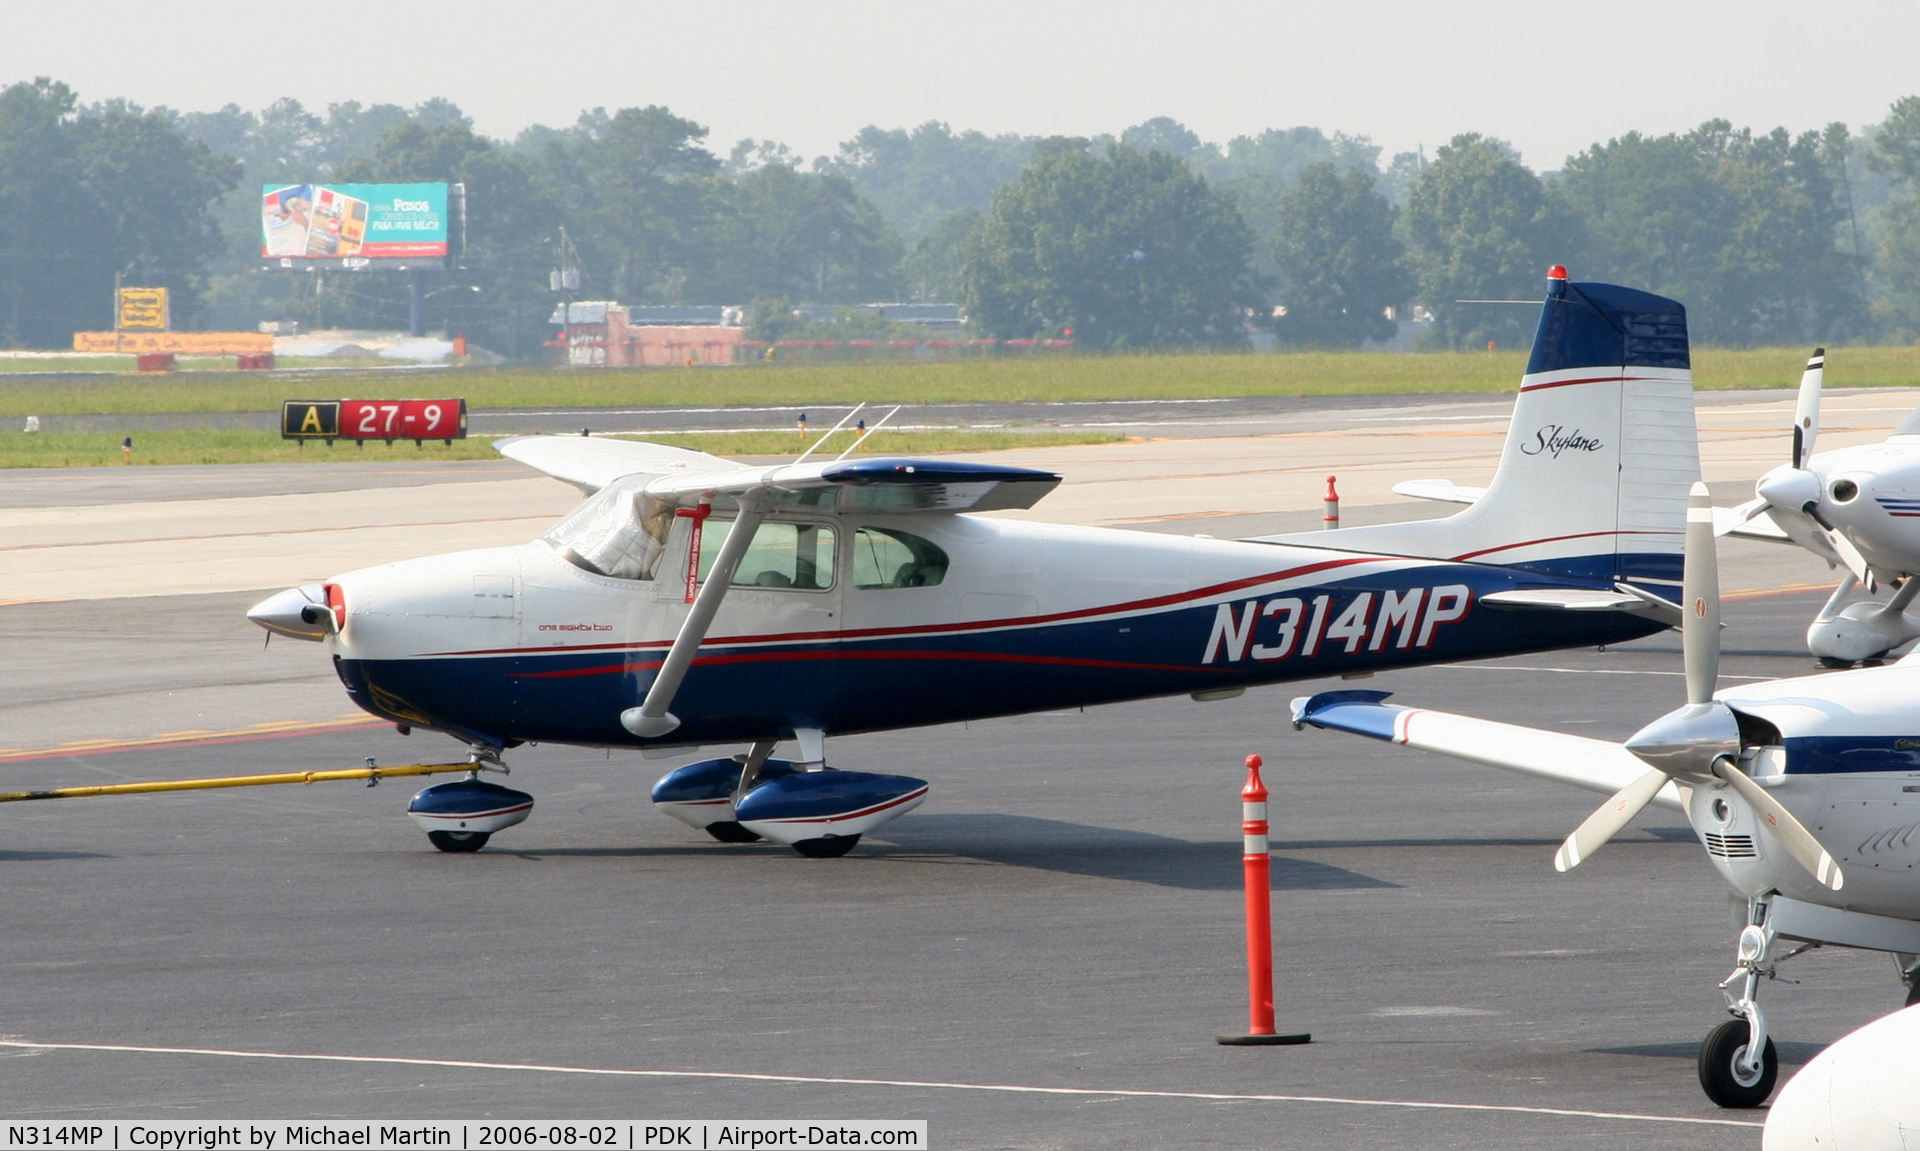 N314MP, 1958 Cessna 182B Skylane C/N 51634, Tied Down @ Mercury Air Center with other A/C